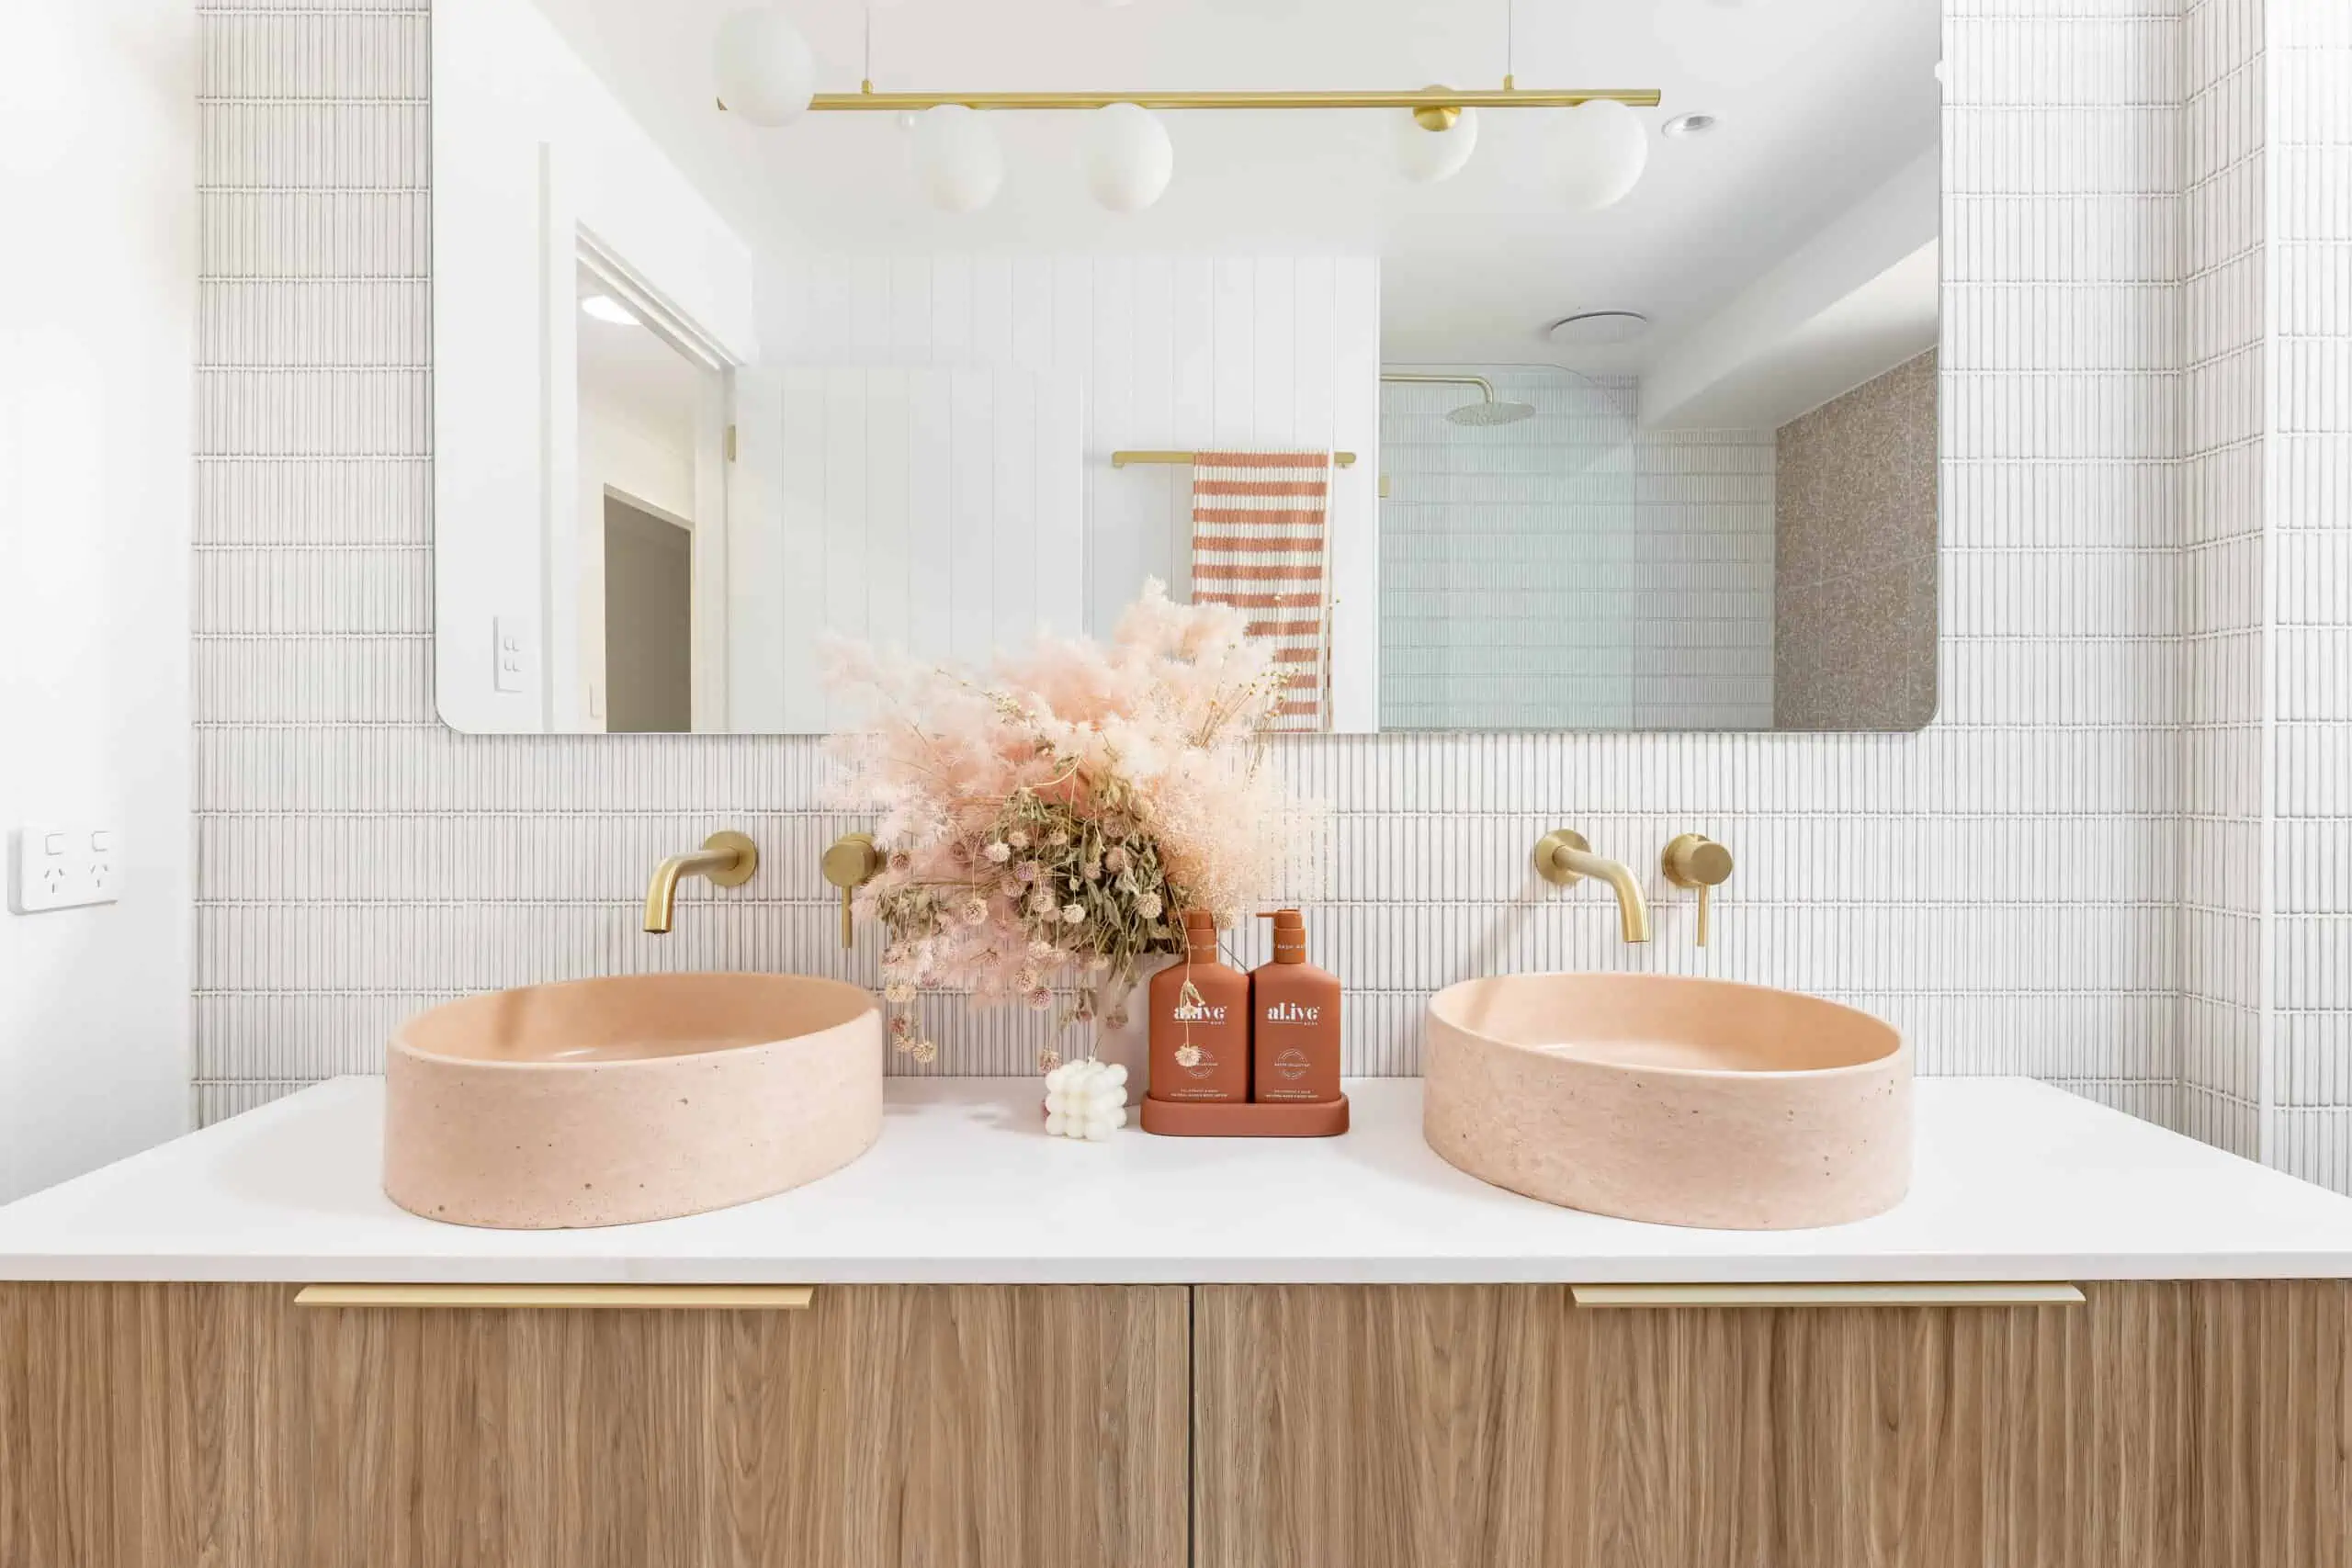 Blush pink, gold and white aesthetic in a bathroom renovation. Shot of the vanity unit.